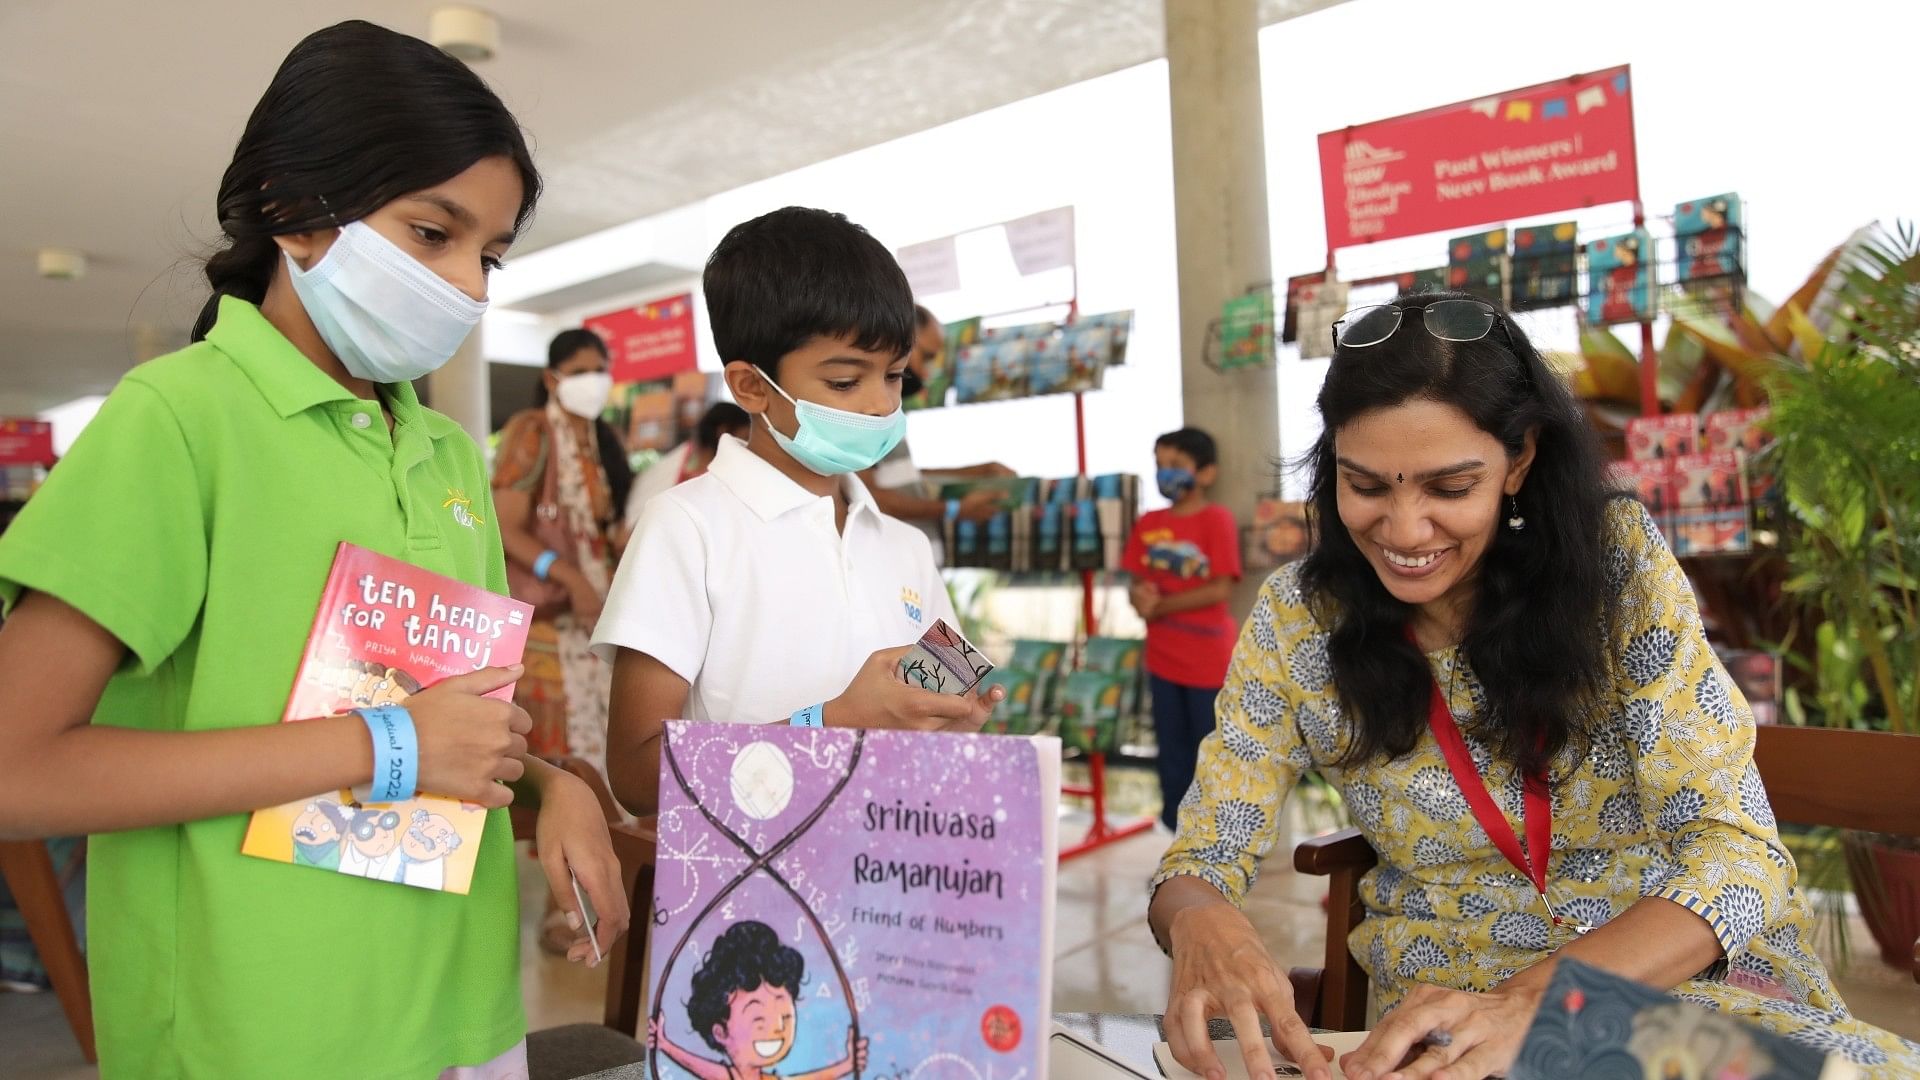 The Neev Literature Festival 2022 focused on celebrating Indian stories in
children’s books.